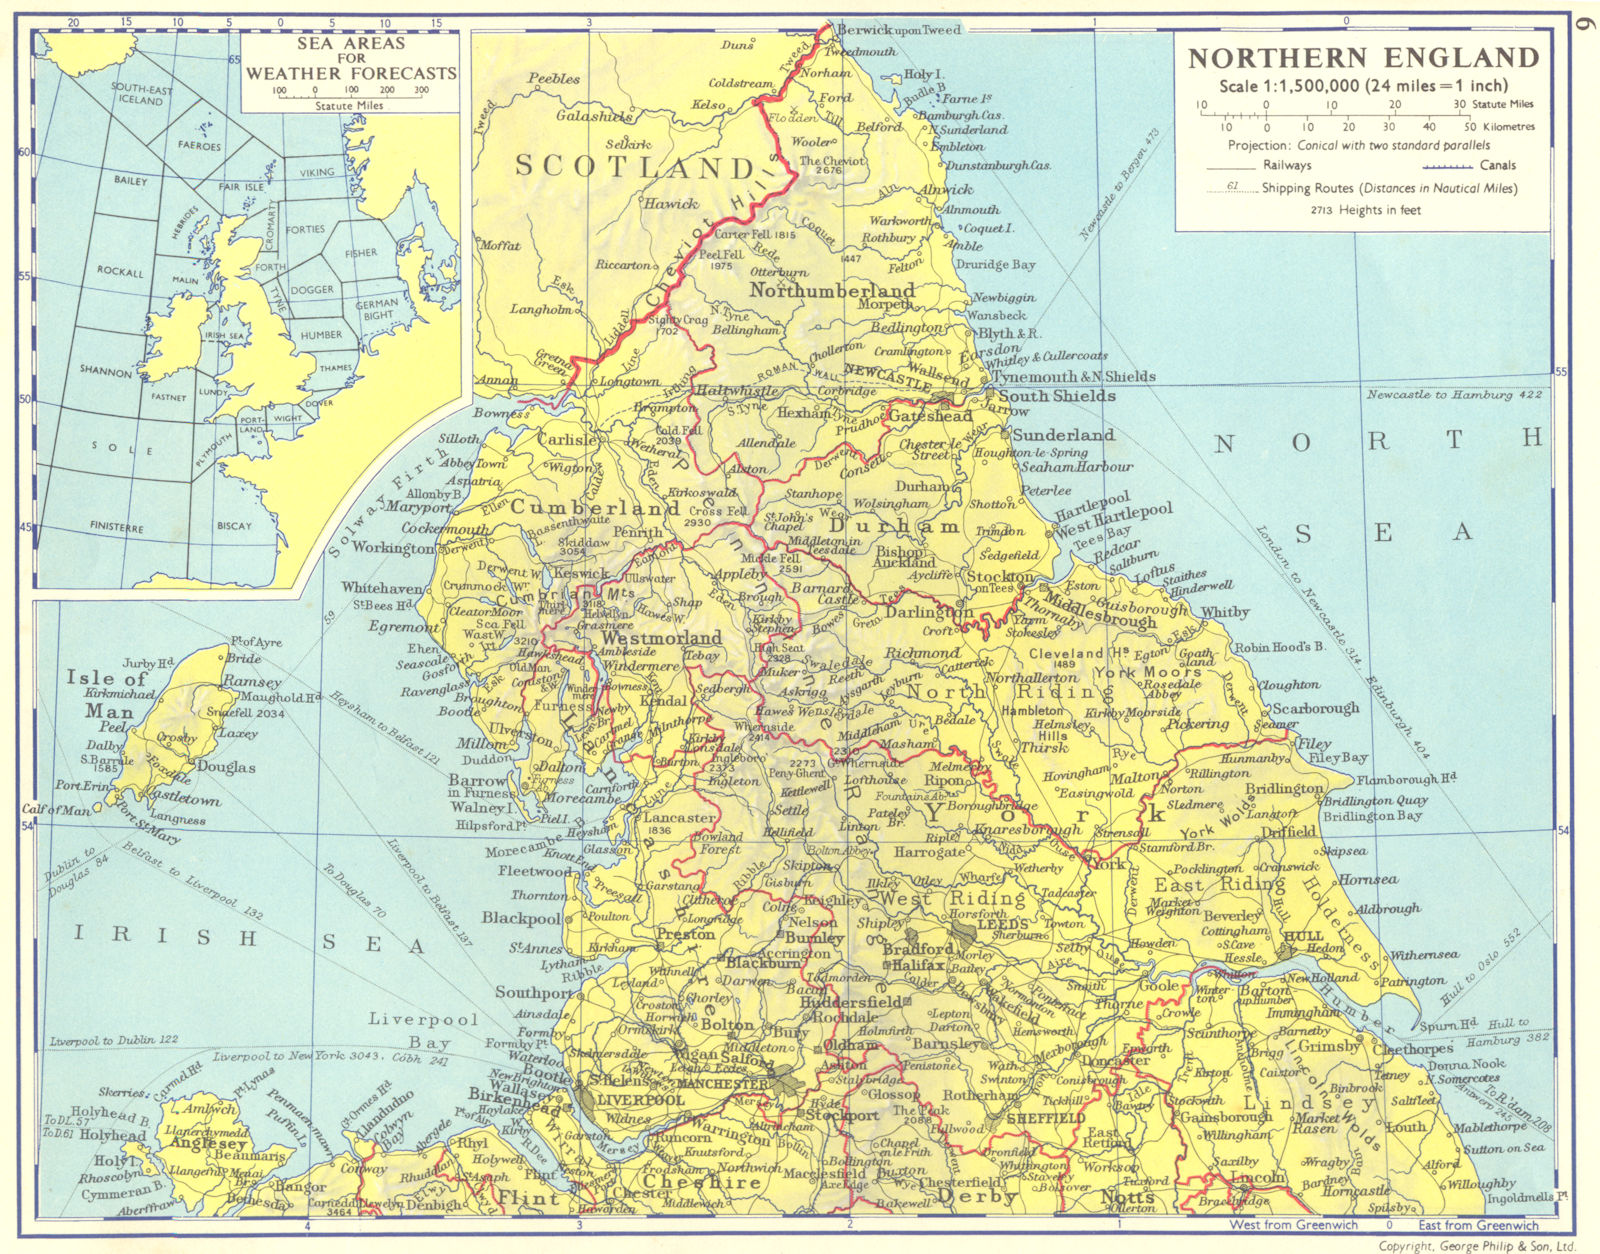 ENGLAND. Northern England; Inset UK sea areas for weather forecasts 1962 map